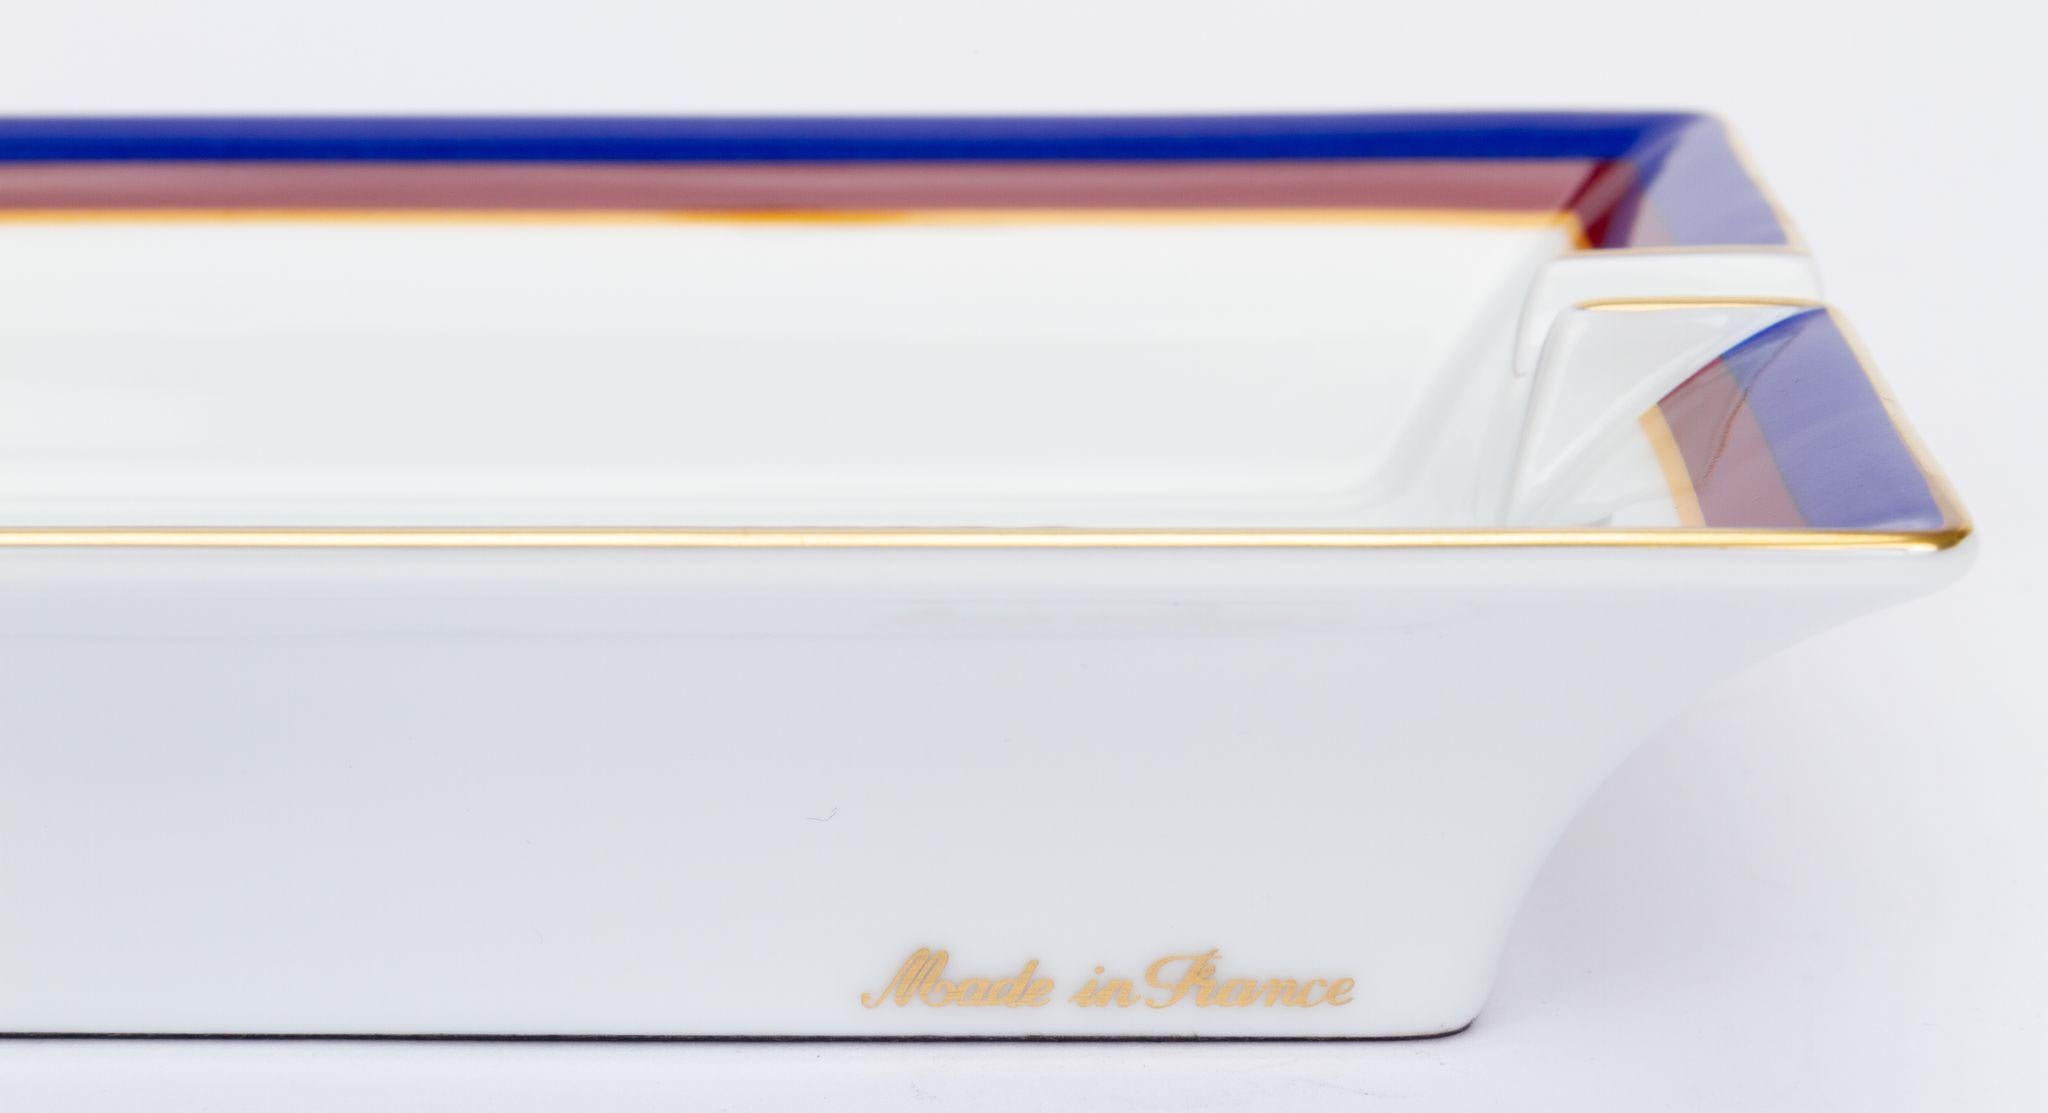 Hermès Navire Aerien 1851Ashtray In Excellent Condition For Sale In West Hollywood, CA